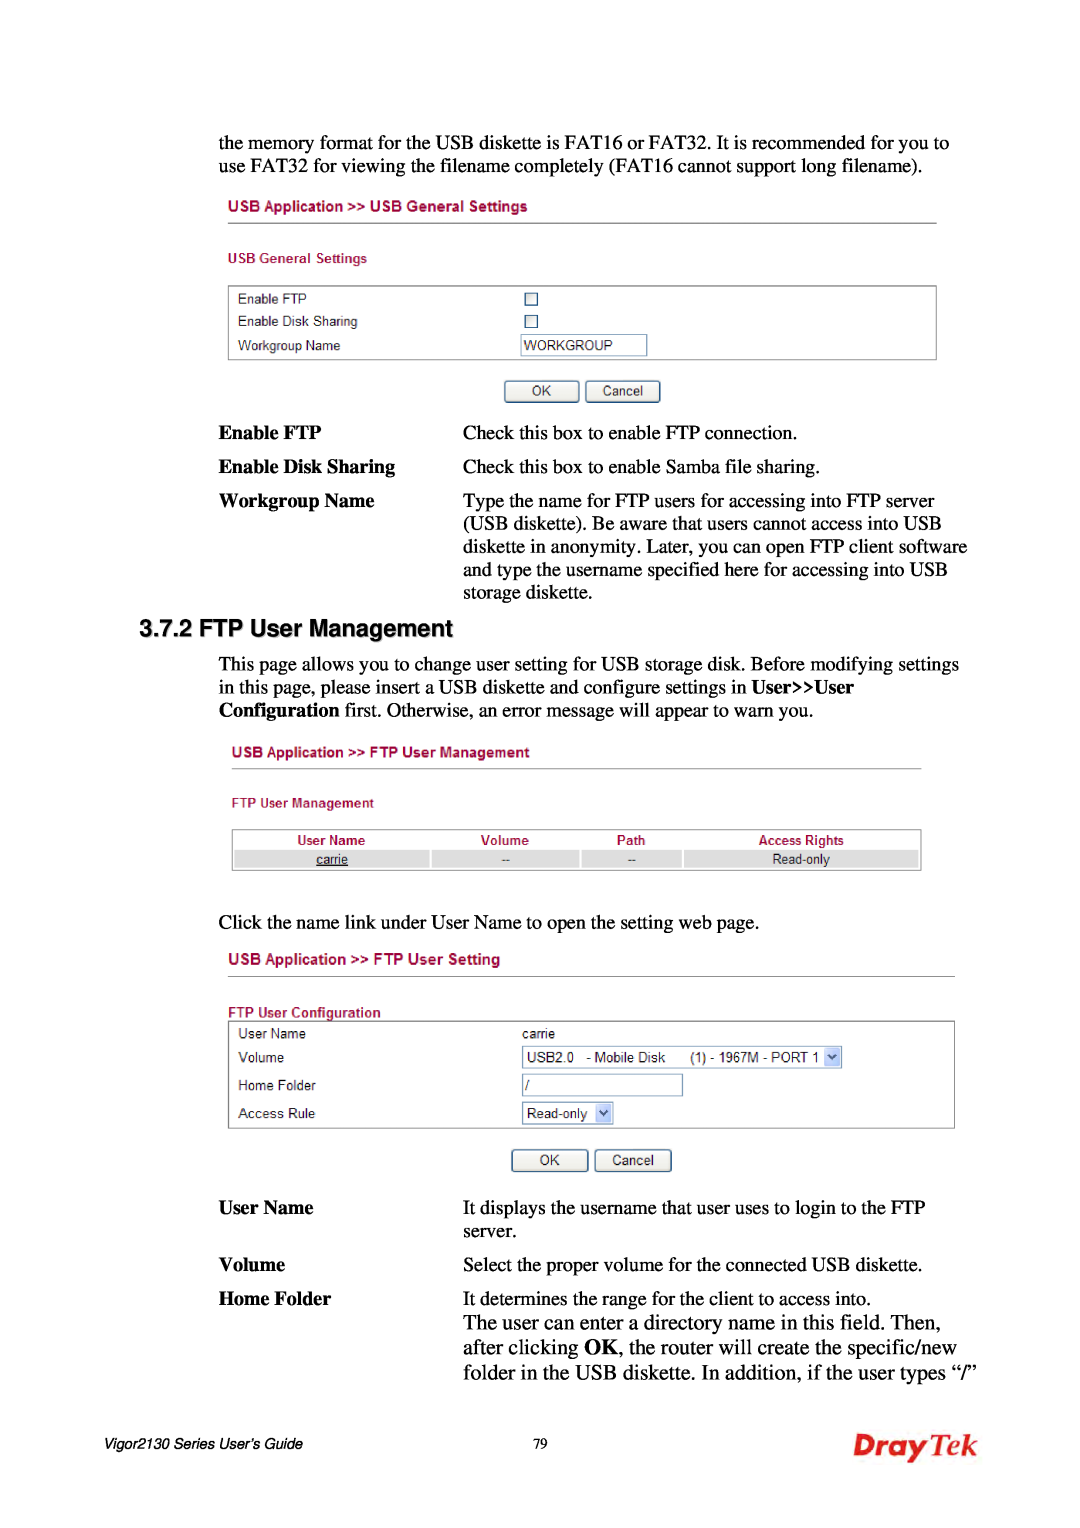 Draytek 2130 manual FTP User Management, The user can enter a directory name in this field. Then 